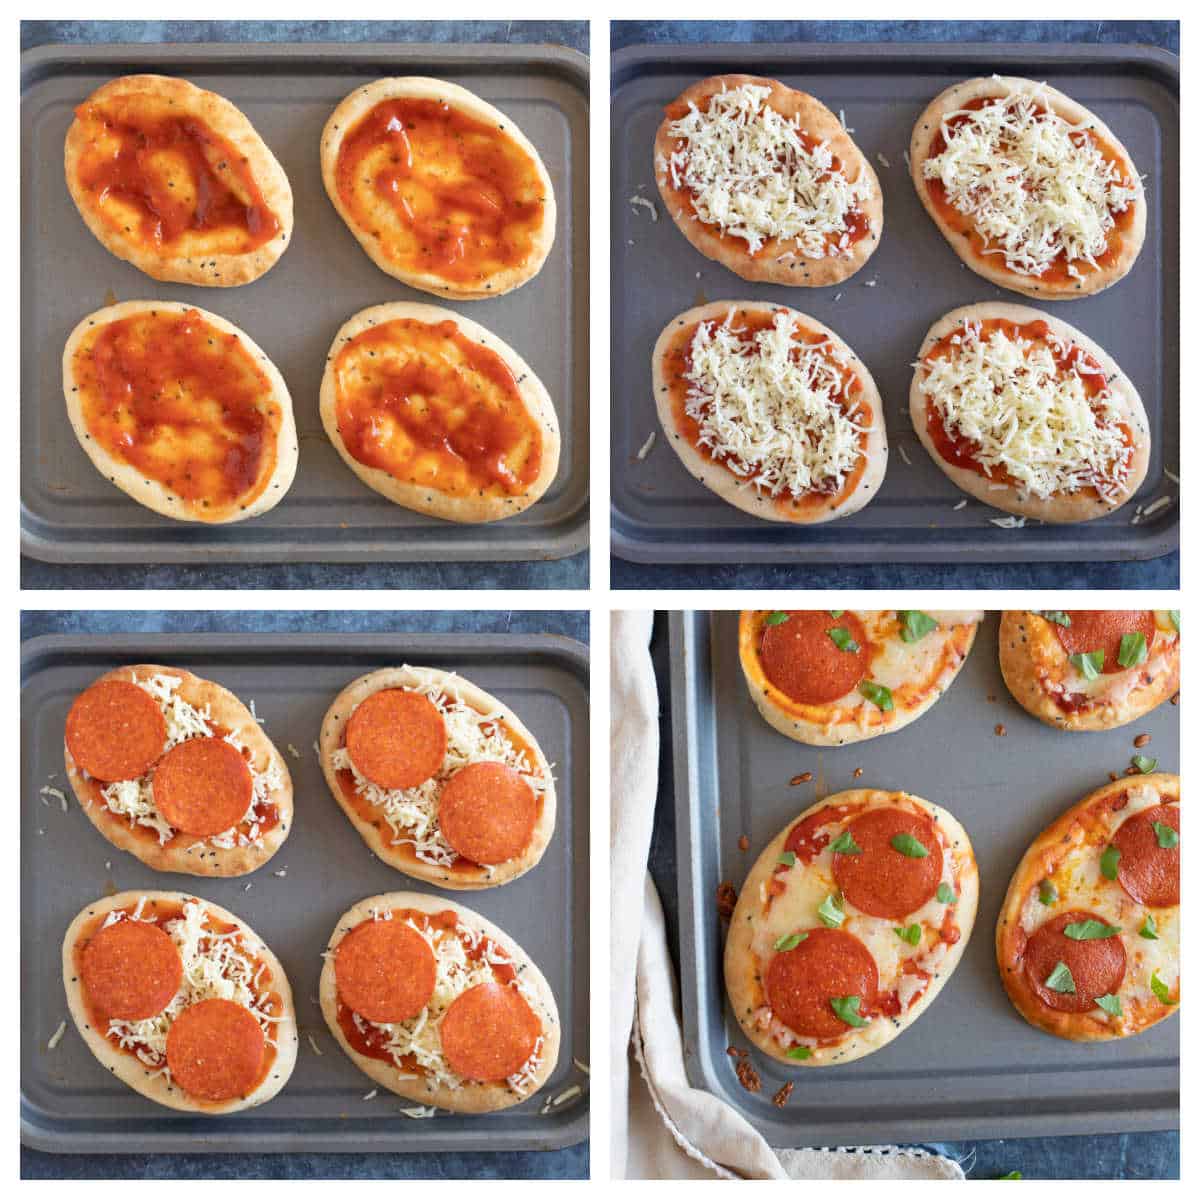 Step by step photo instructions for making mini naan bread pizzas.